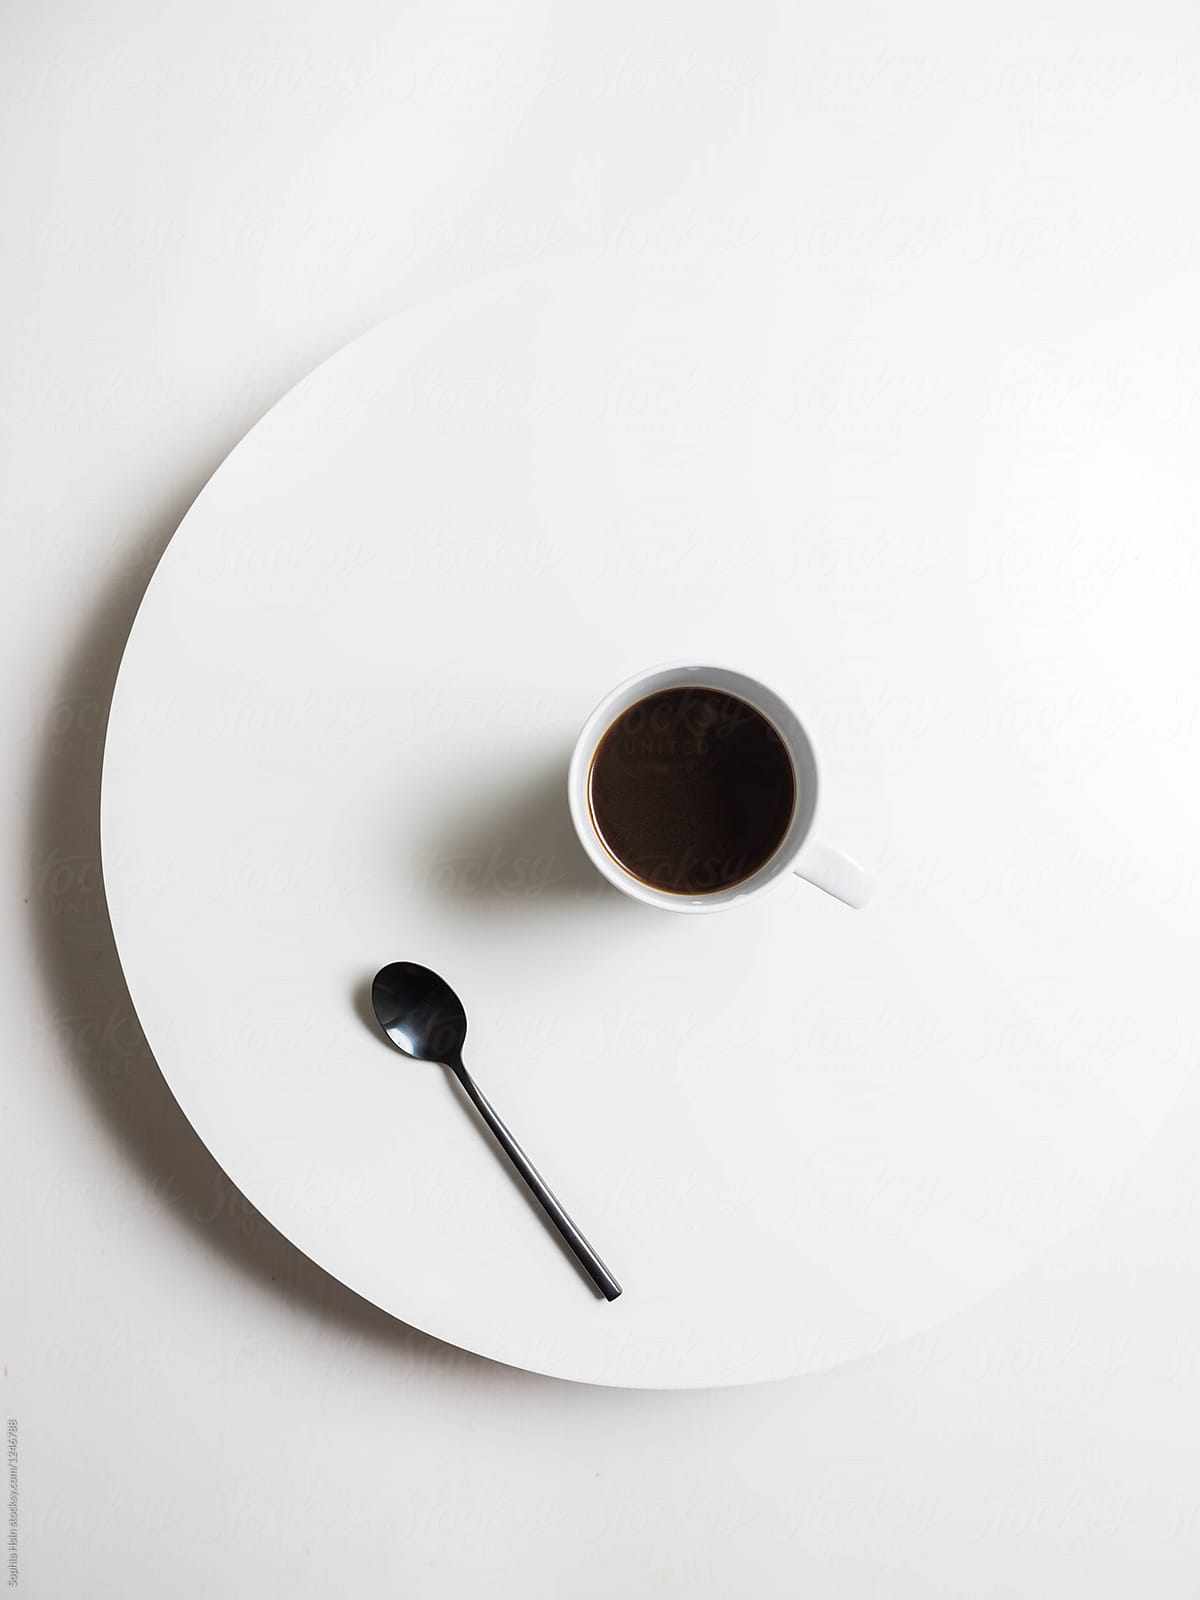 Black coffee on white table with black spoon